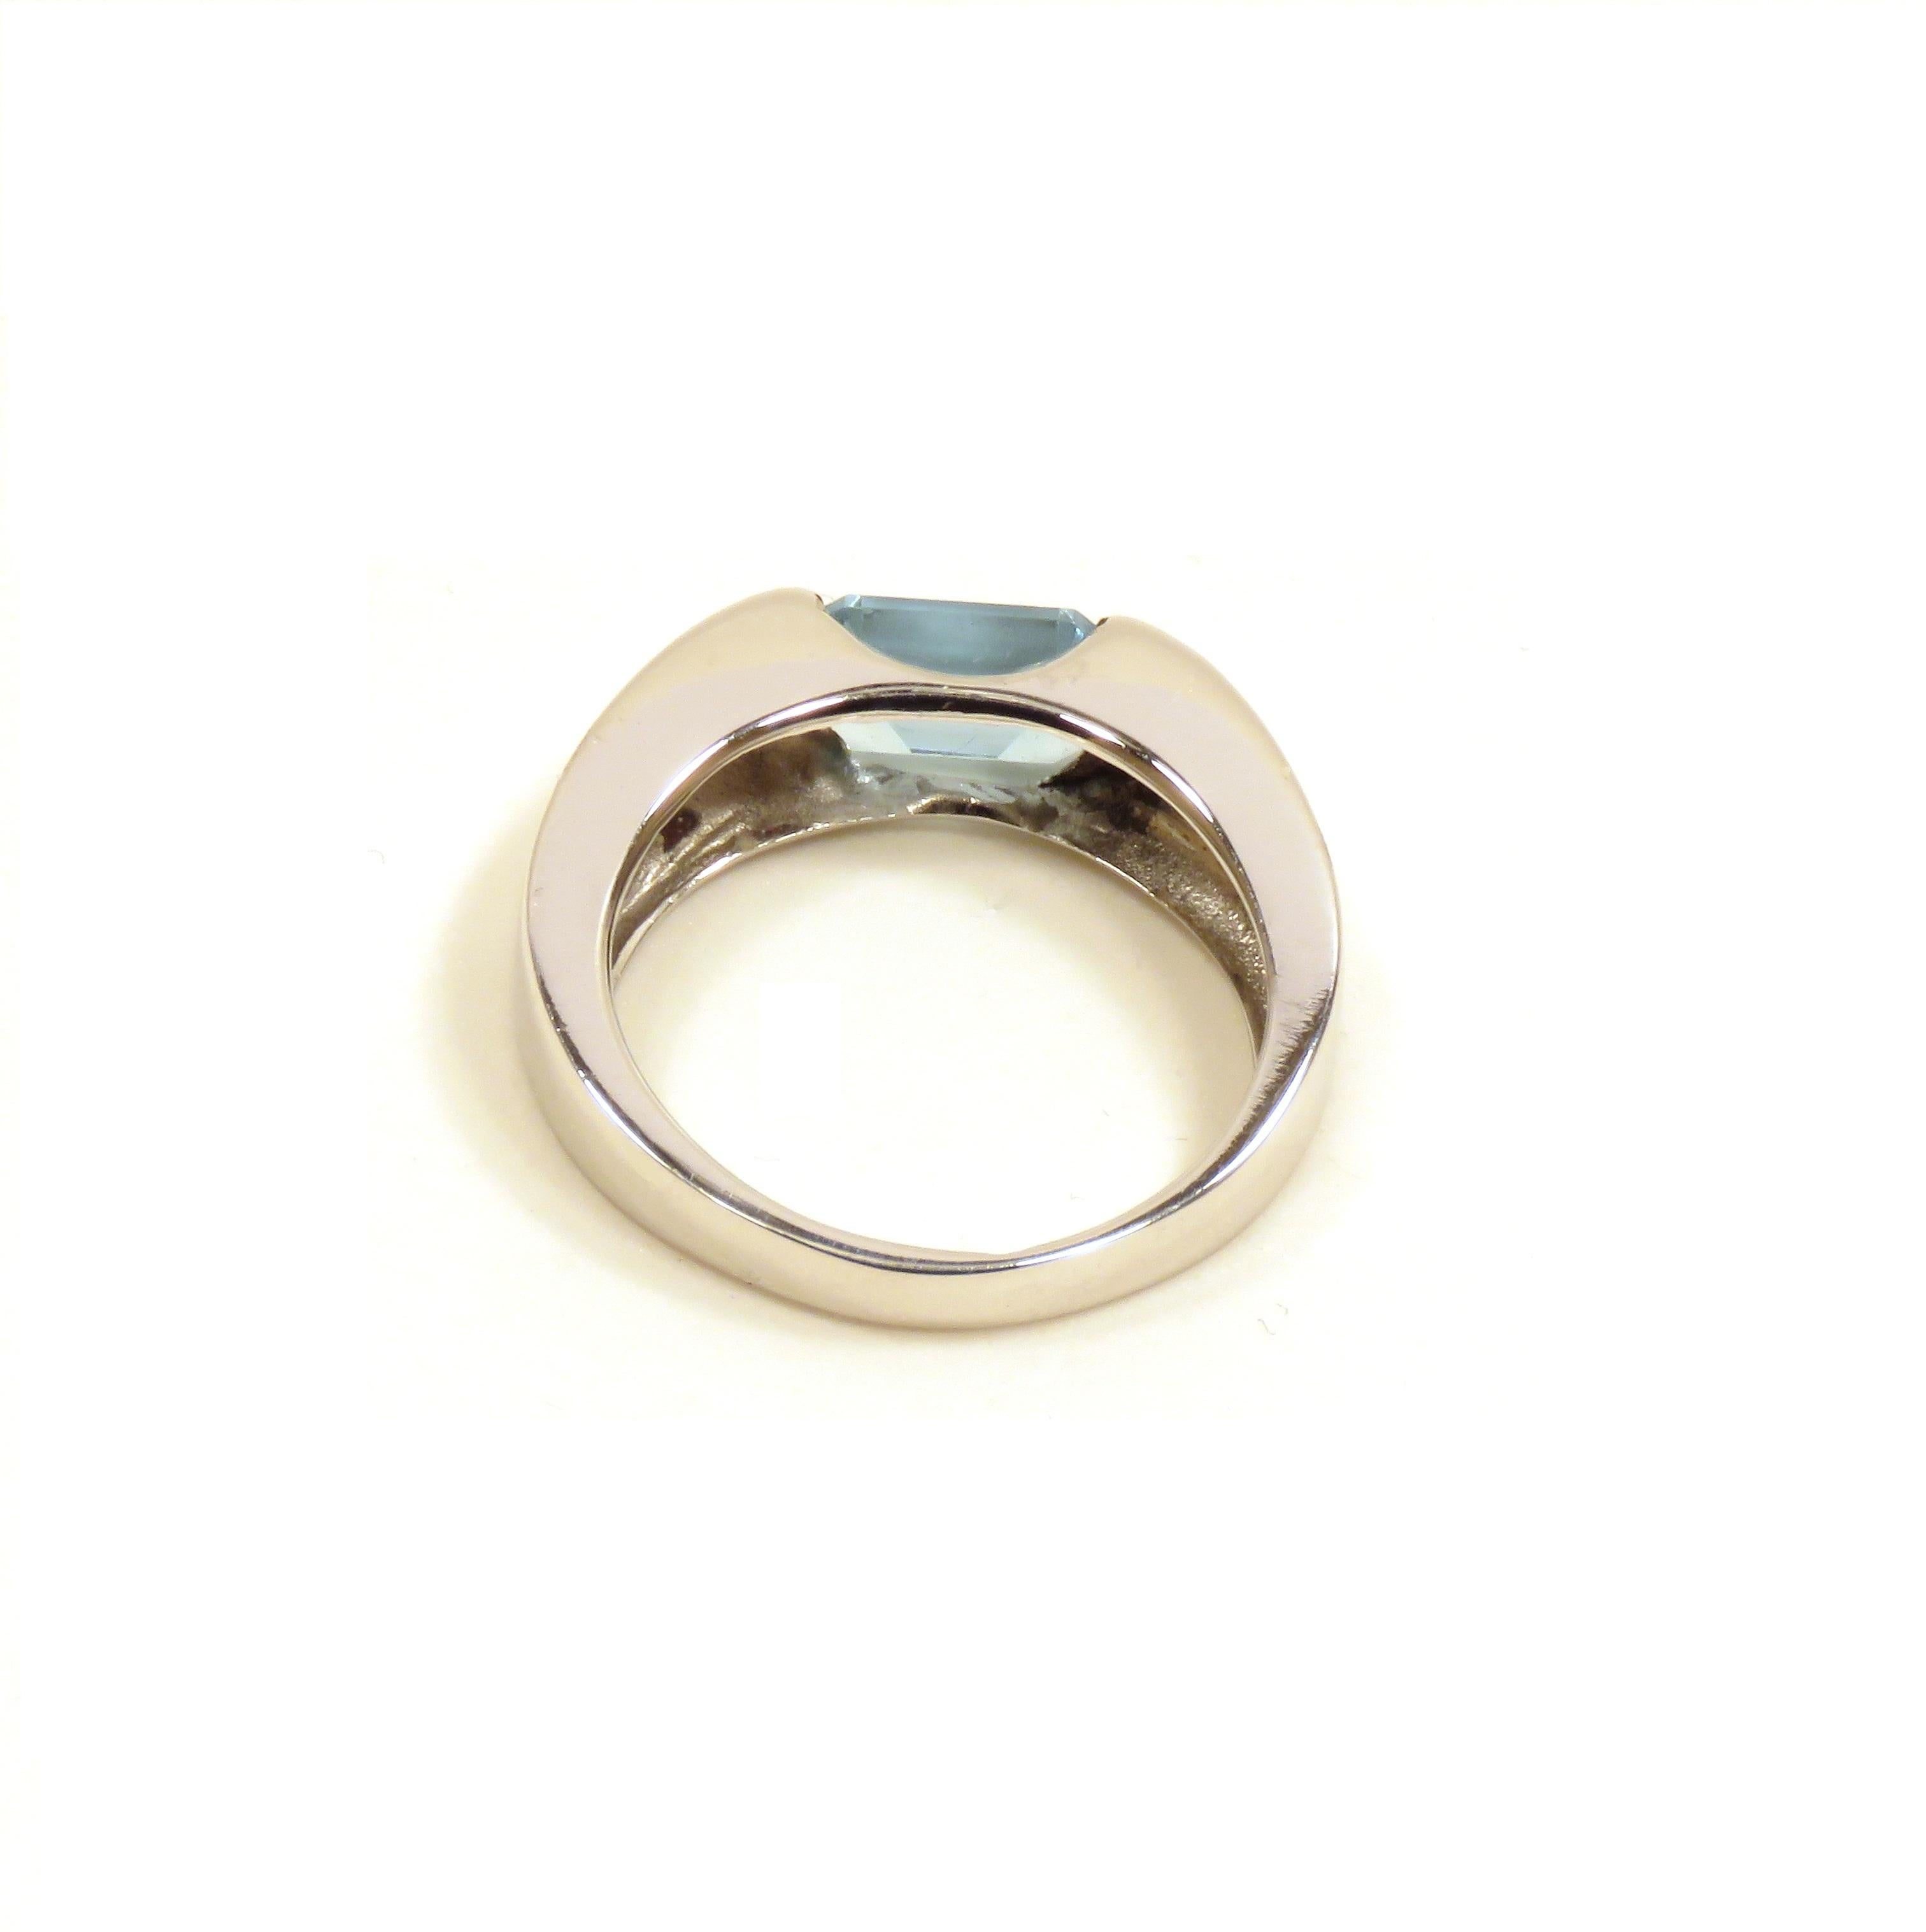 Aquamarine White 18 Karat Gold Band Ring Handcrafted in Italy by Botta Gioielli 2